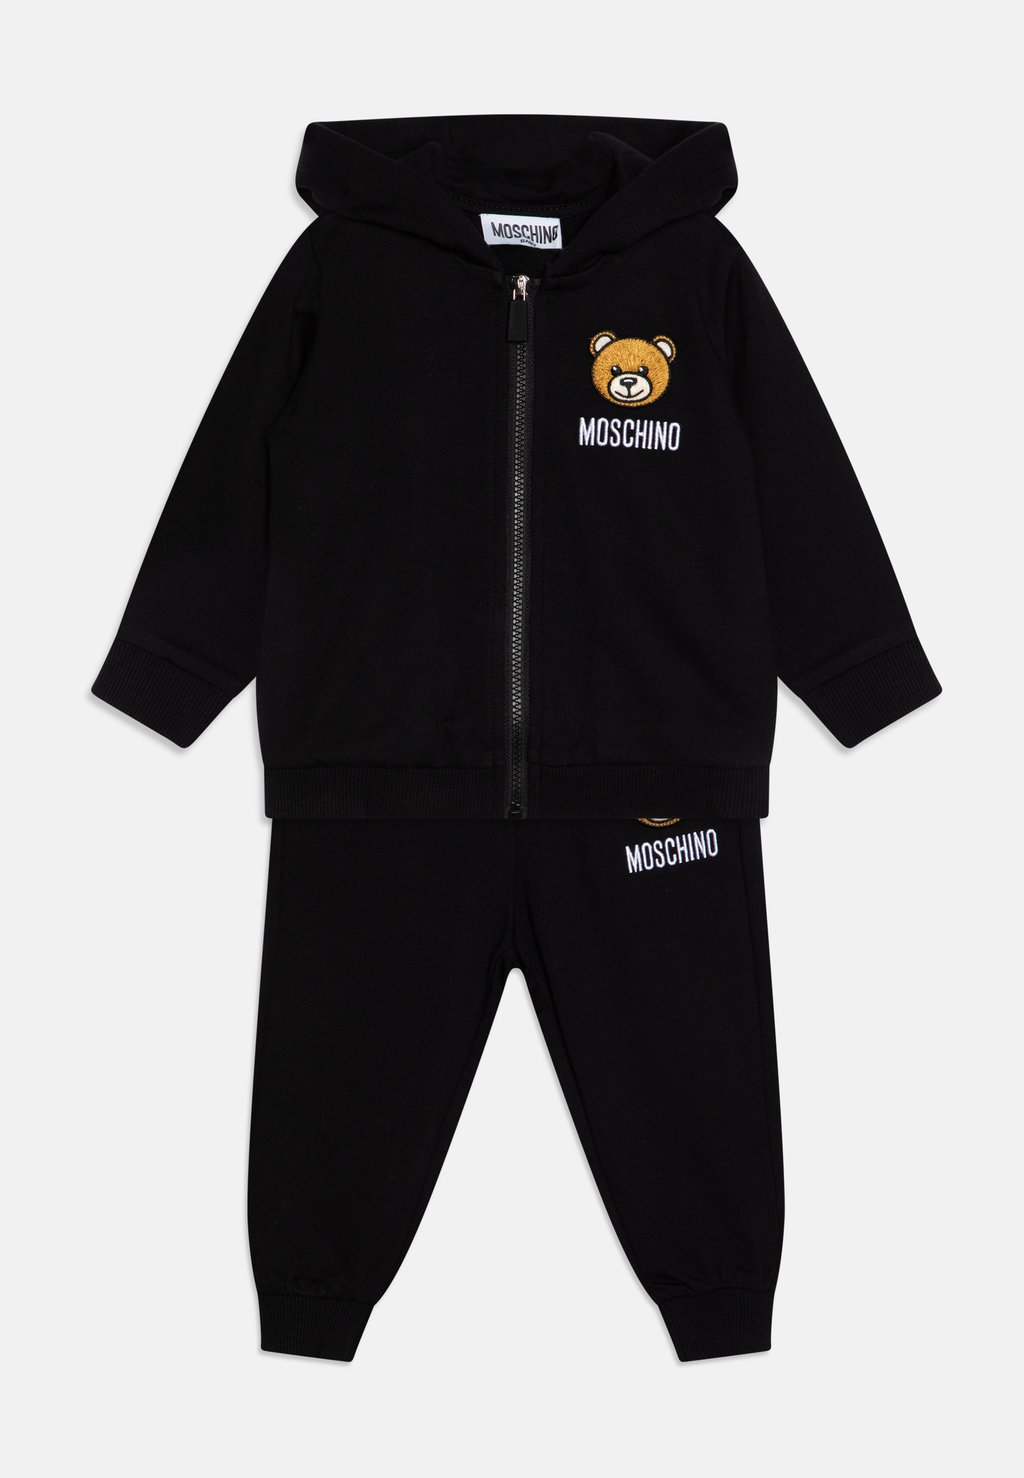 Брюки BABY HOODED TRACKSUIT UNISEX SET MOSCHINO, цвет black boys tracksuit clothes set kids hooded spring